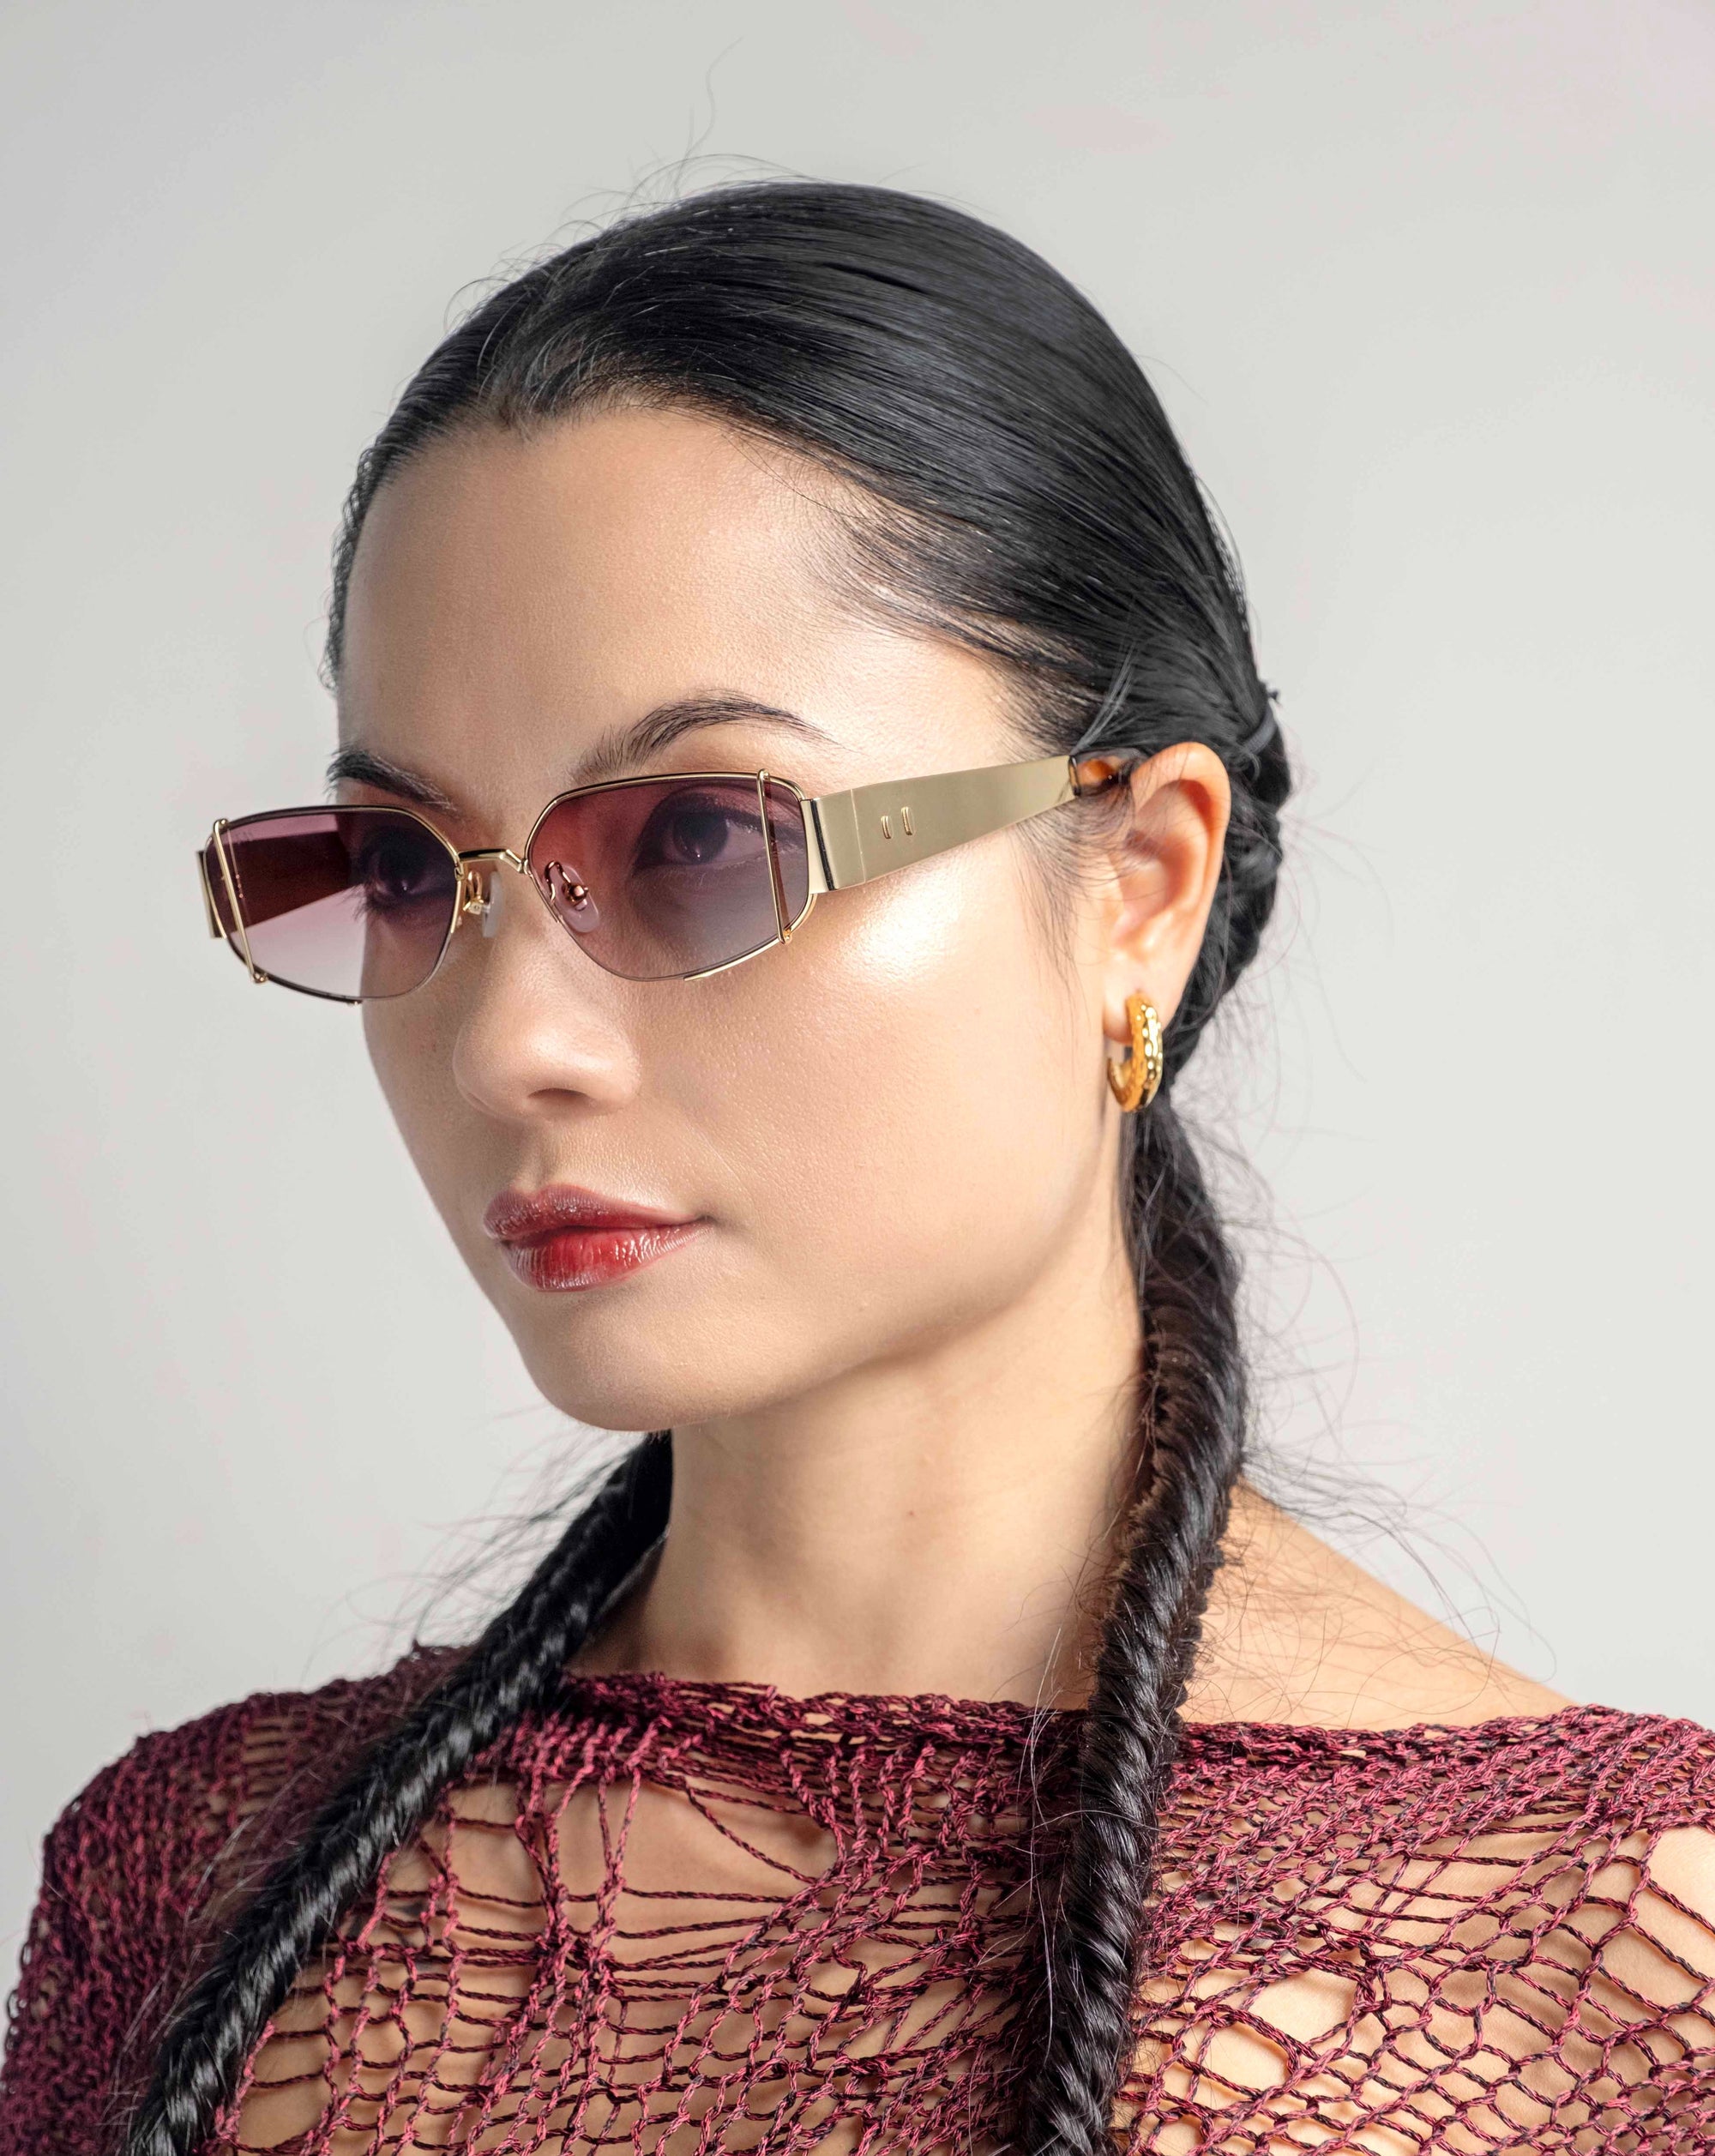 A woman with long, dark braided hair is wearing stylish For Art&#39;s Sake® Talia sunglasses with 18-karat gold metal frames, gold hoop earrings, and a red, intricately knitted top. She is looking to the side against a plain, light-colored background.